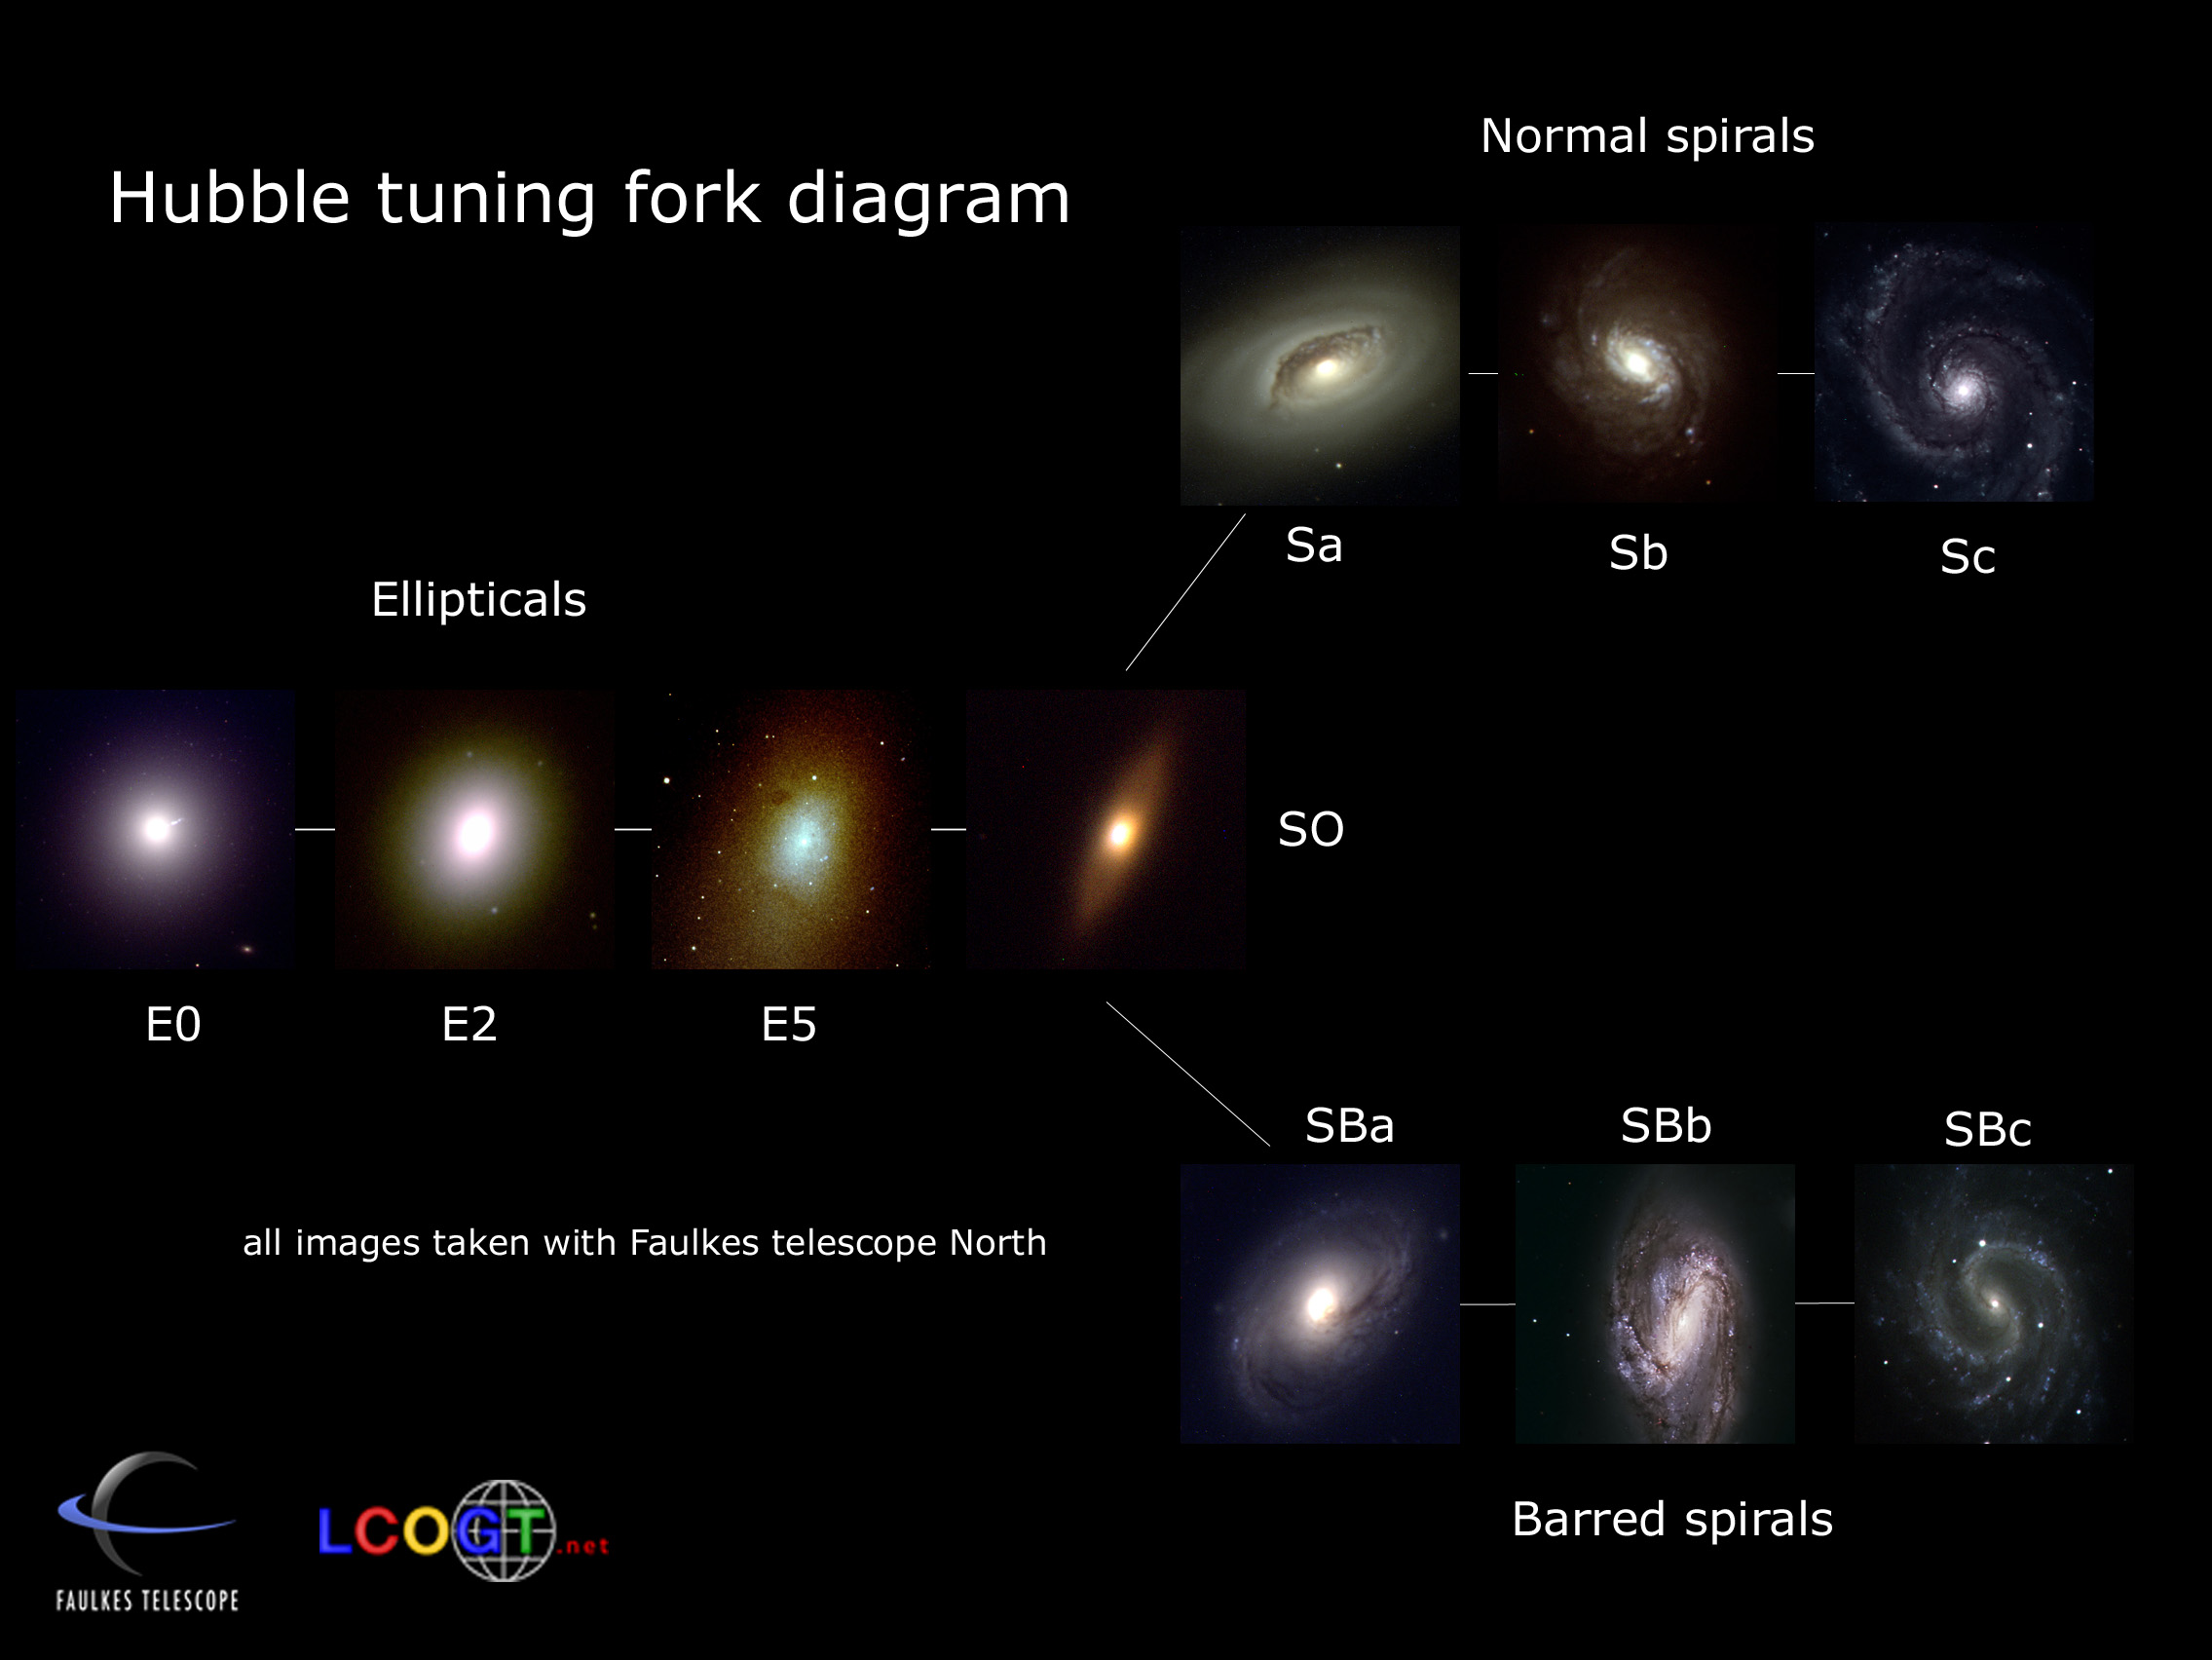 Hubble tuning fork